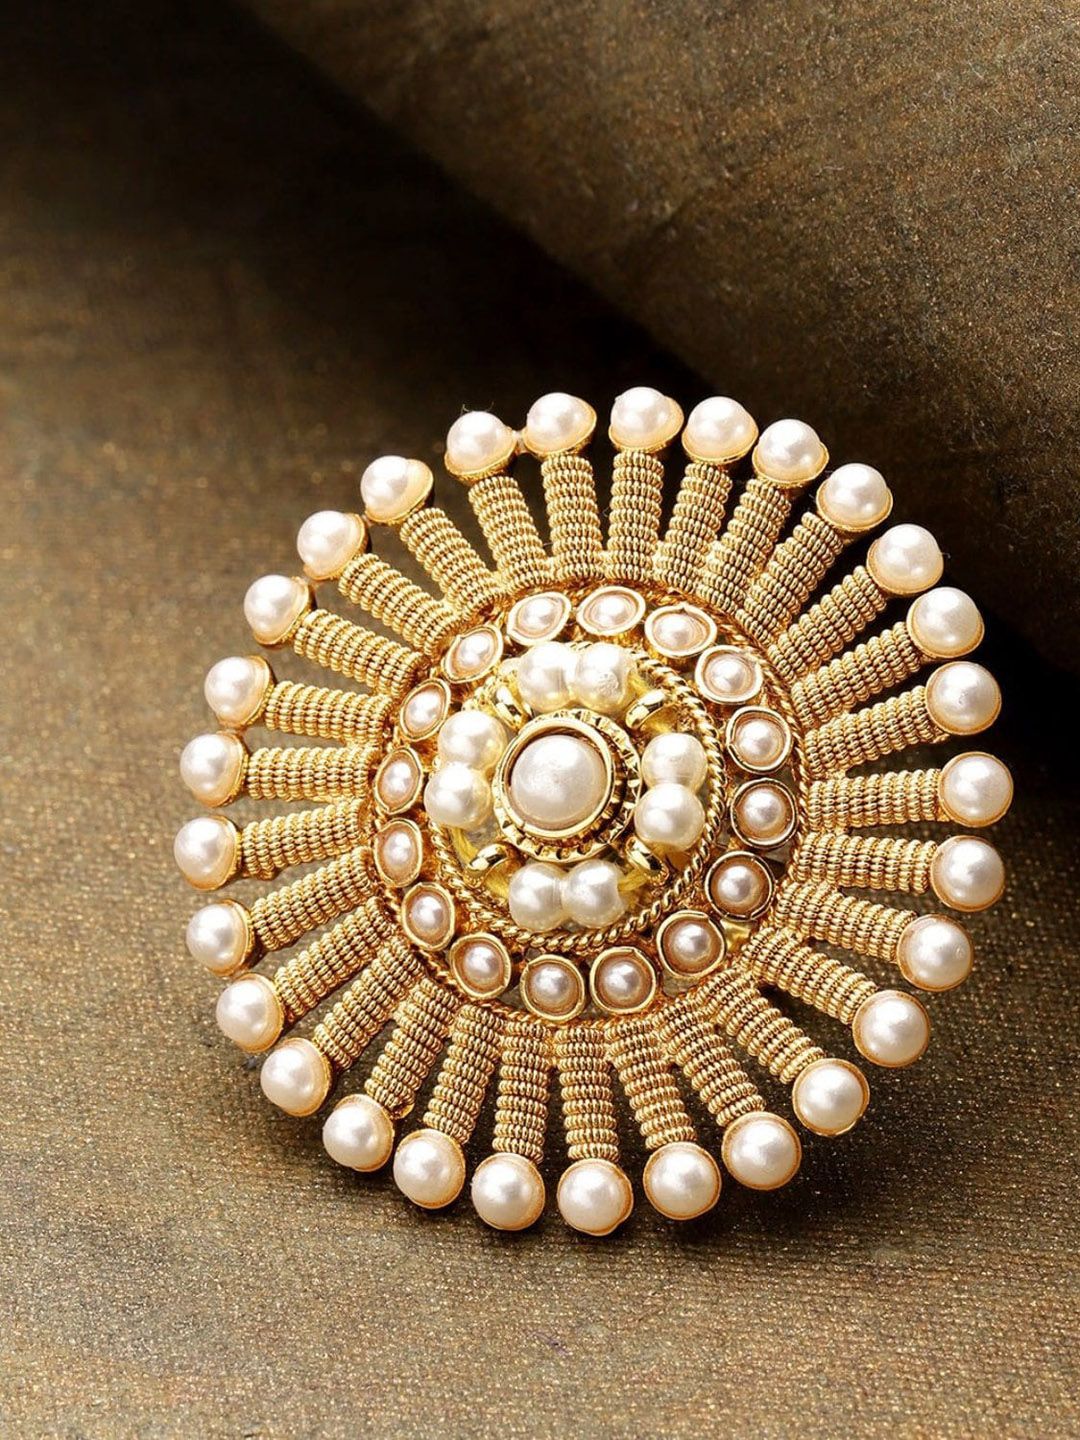 Priyaasi Gold-Plated & White Pearls Studded Adjustable Ring Price in India